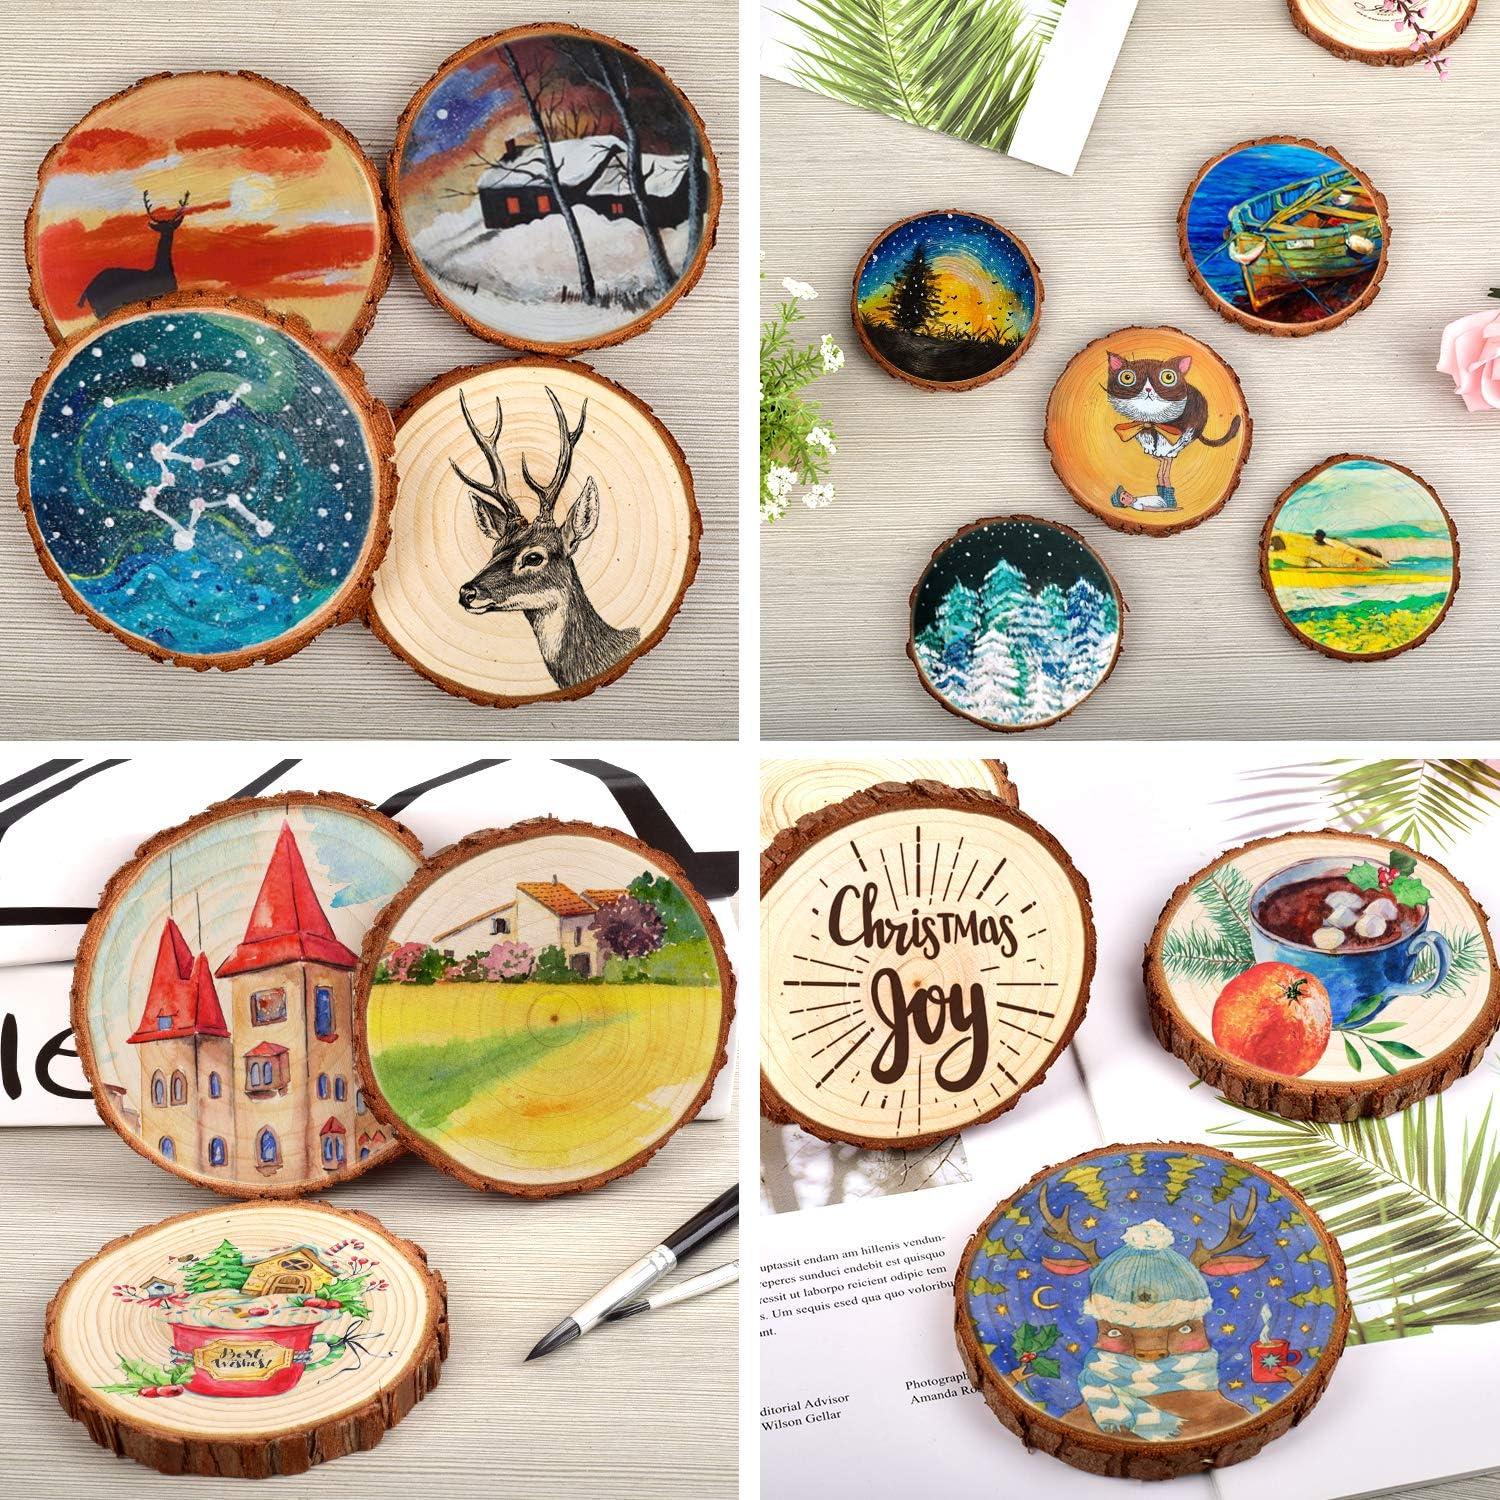 LESUMI Unfinished Natural Wood Slices with Bark - 20 Pcs 3.5-4 inch Wood  Craft kit DIY Kids Arts and Crafts Coasters Christmas Ornaments Rustic  Wedding Decorations